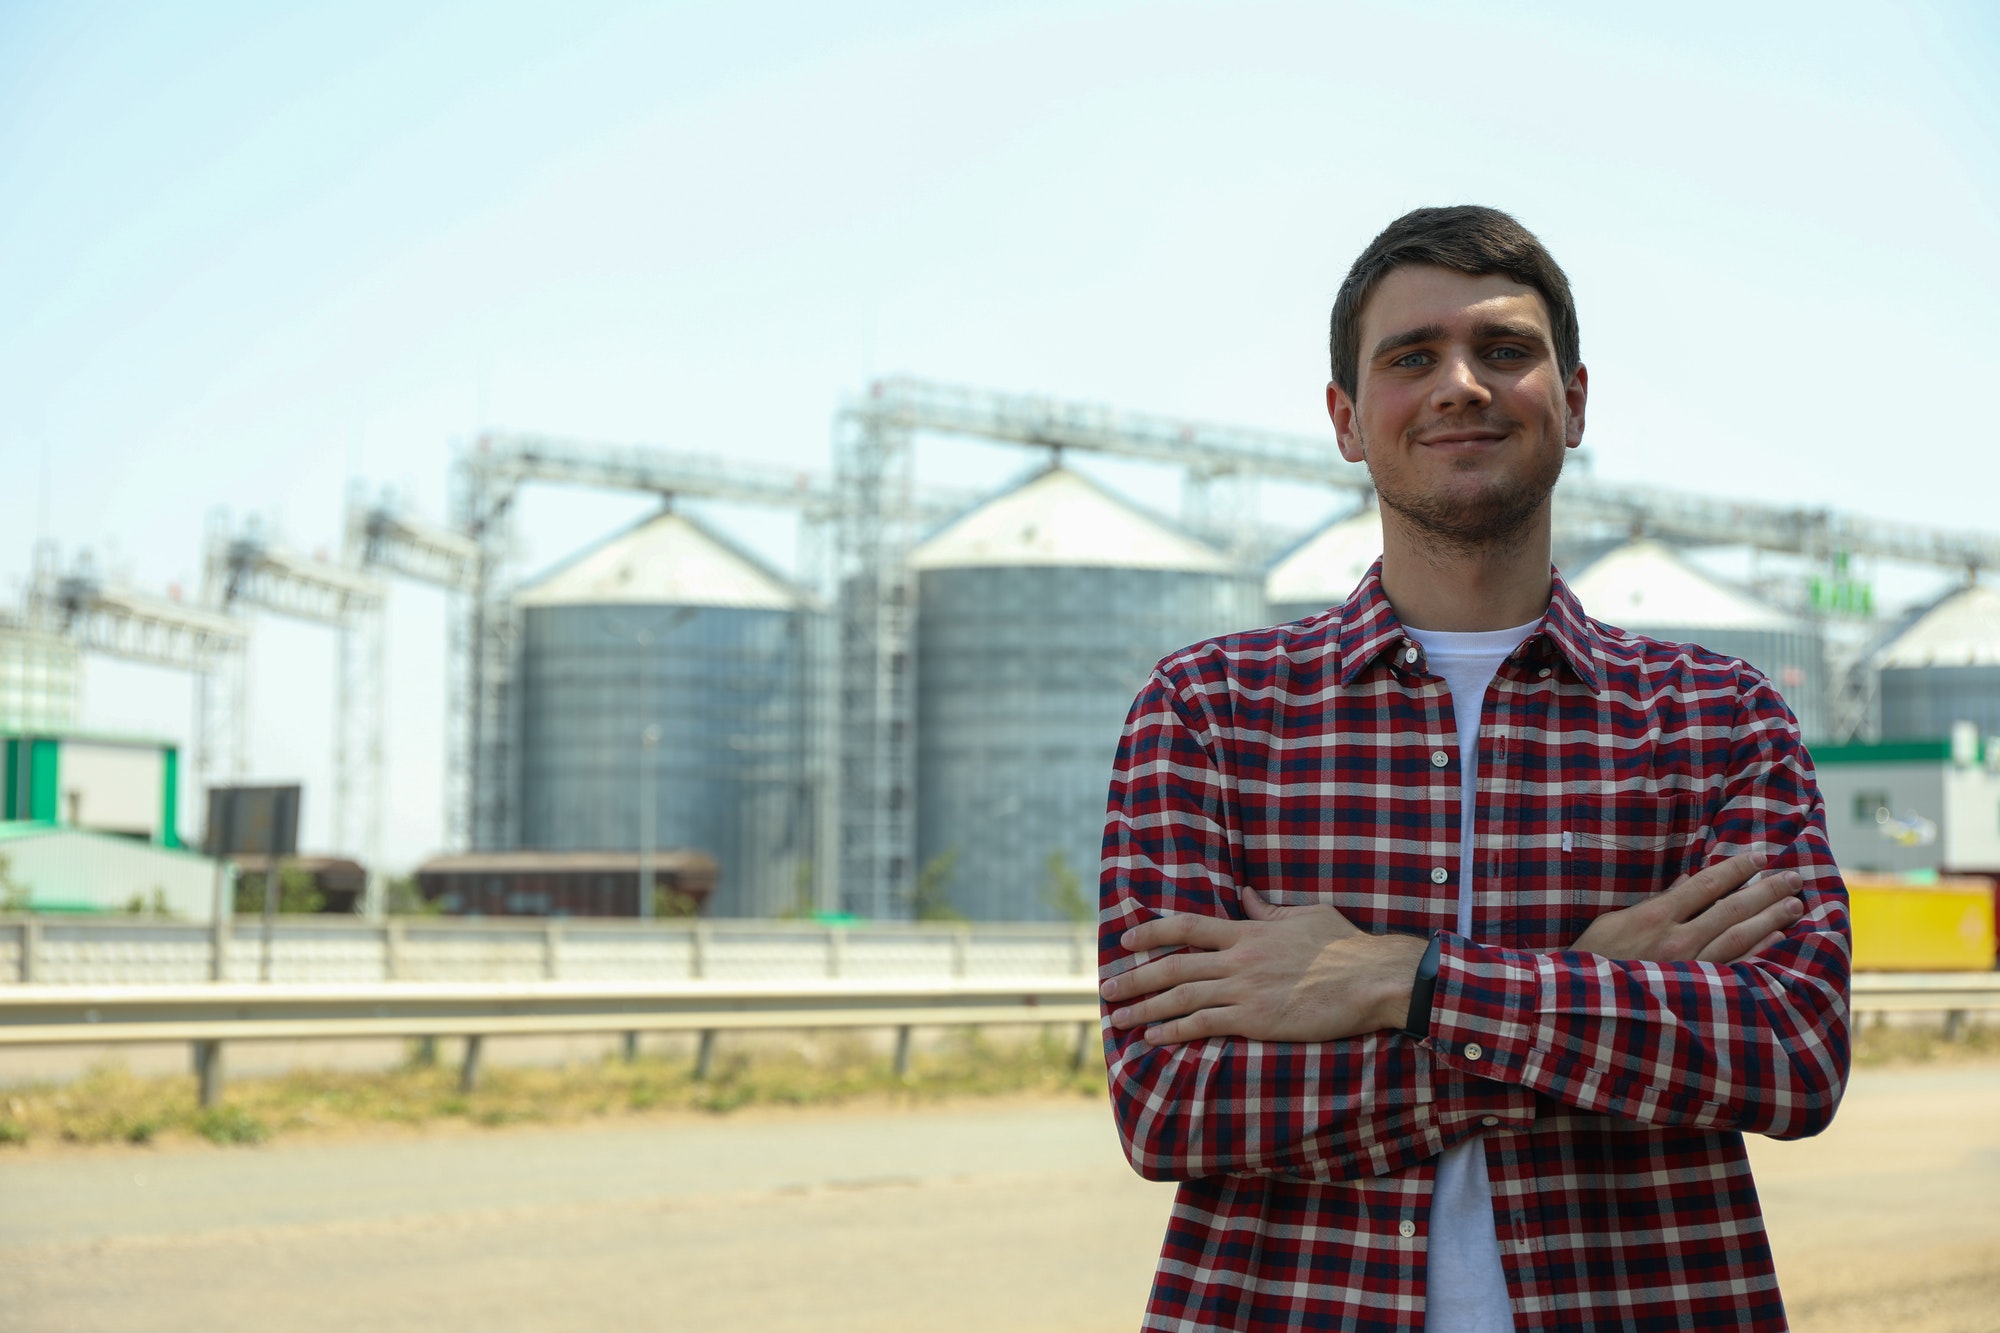 Young man against grain silos. Agriculture business